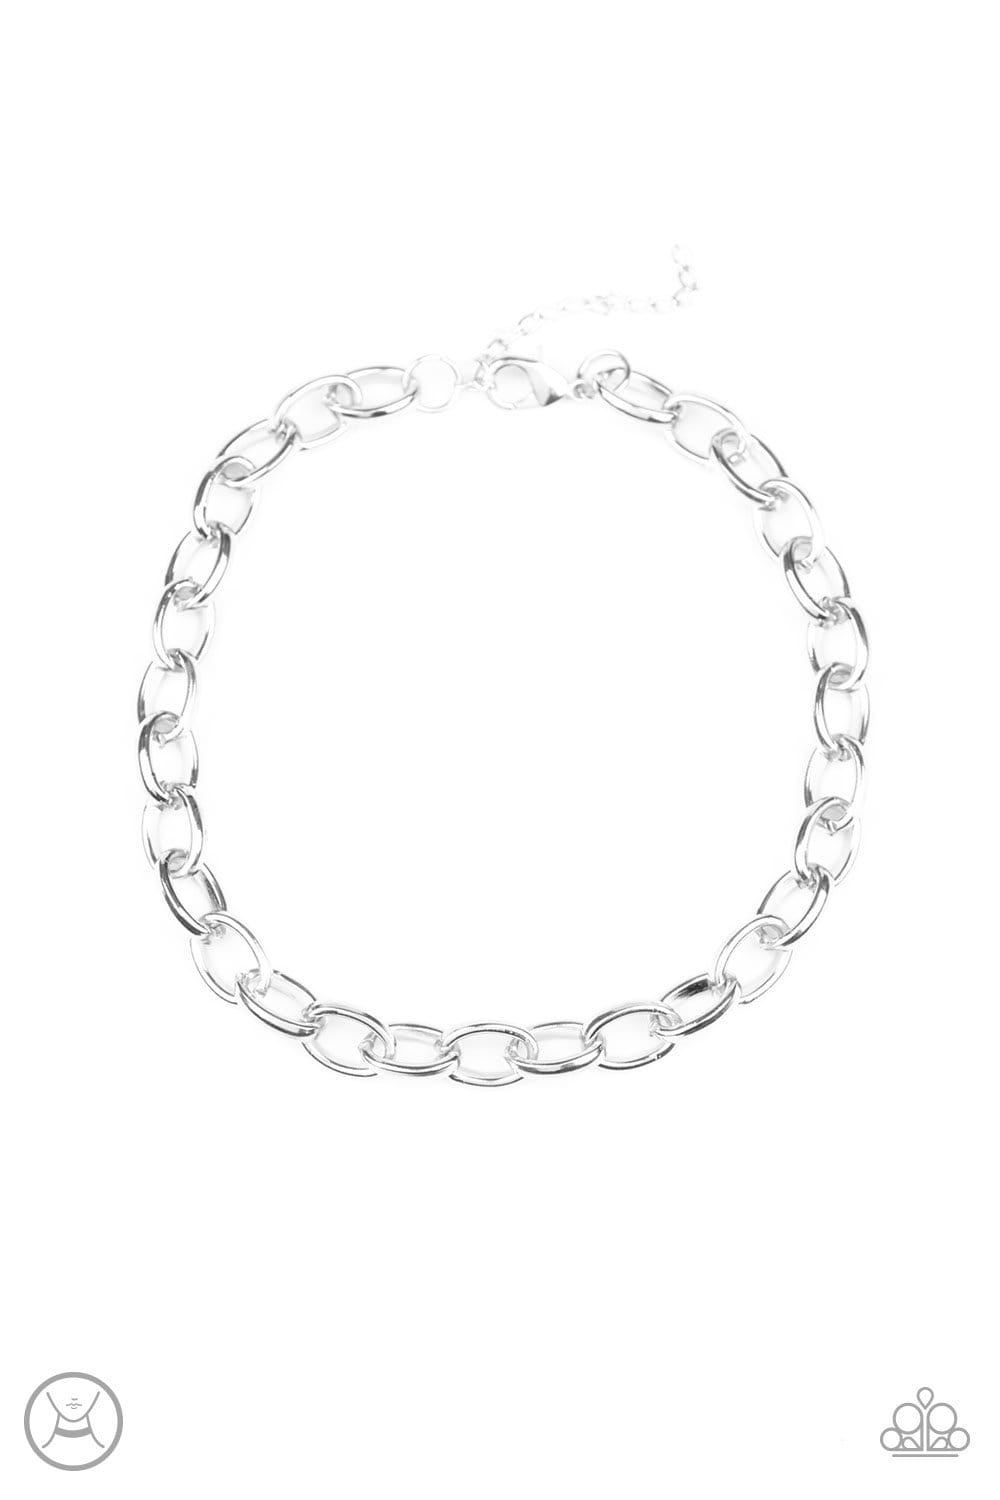 Paparazzi Accessories: Urban Uplink Thingz Necklace Jewels Boutique Choker Silver – N\' 